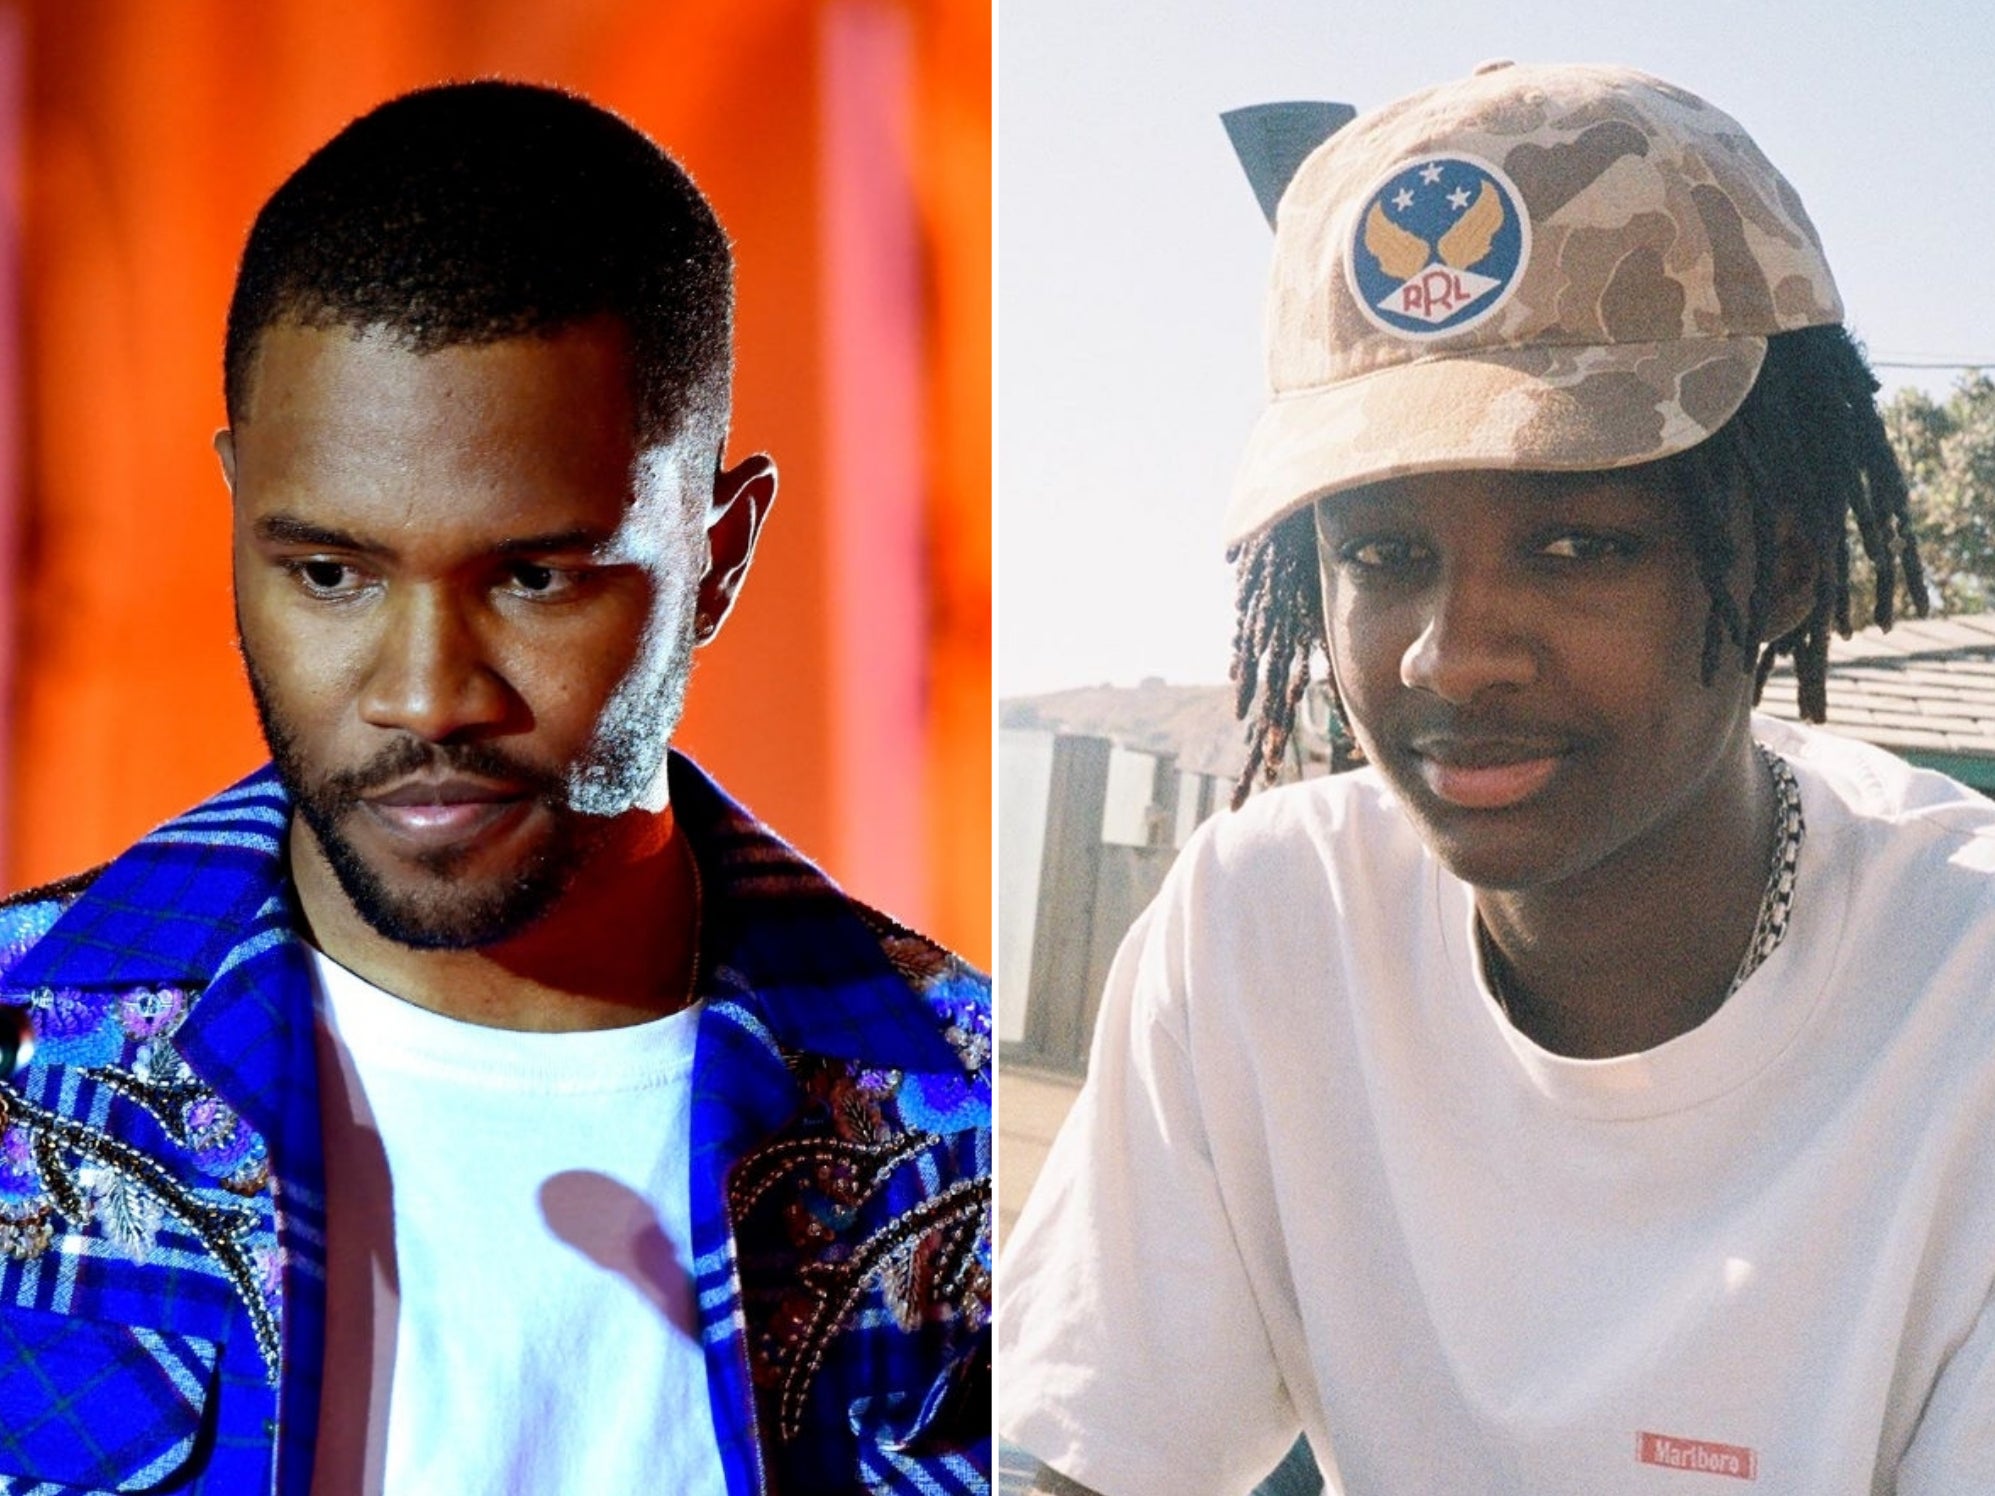 Music icon’s 18-year-old brother passes away tragically in a car accident ft Ryan Breaux and Frank Ocean